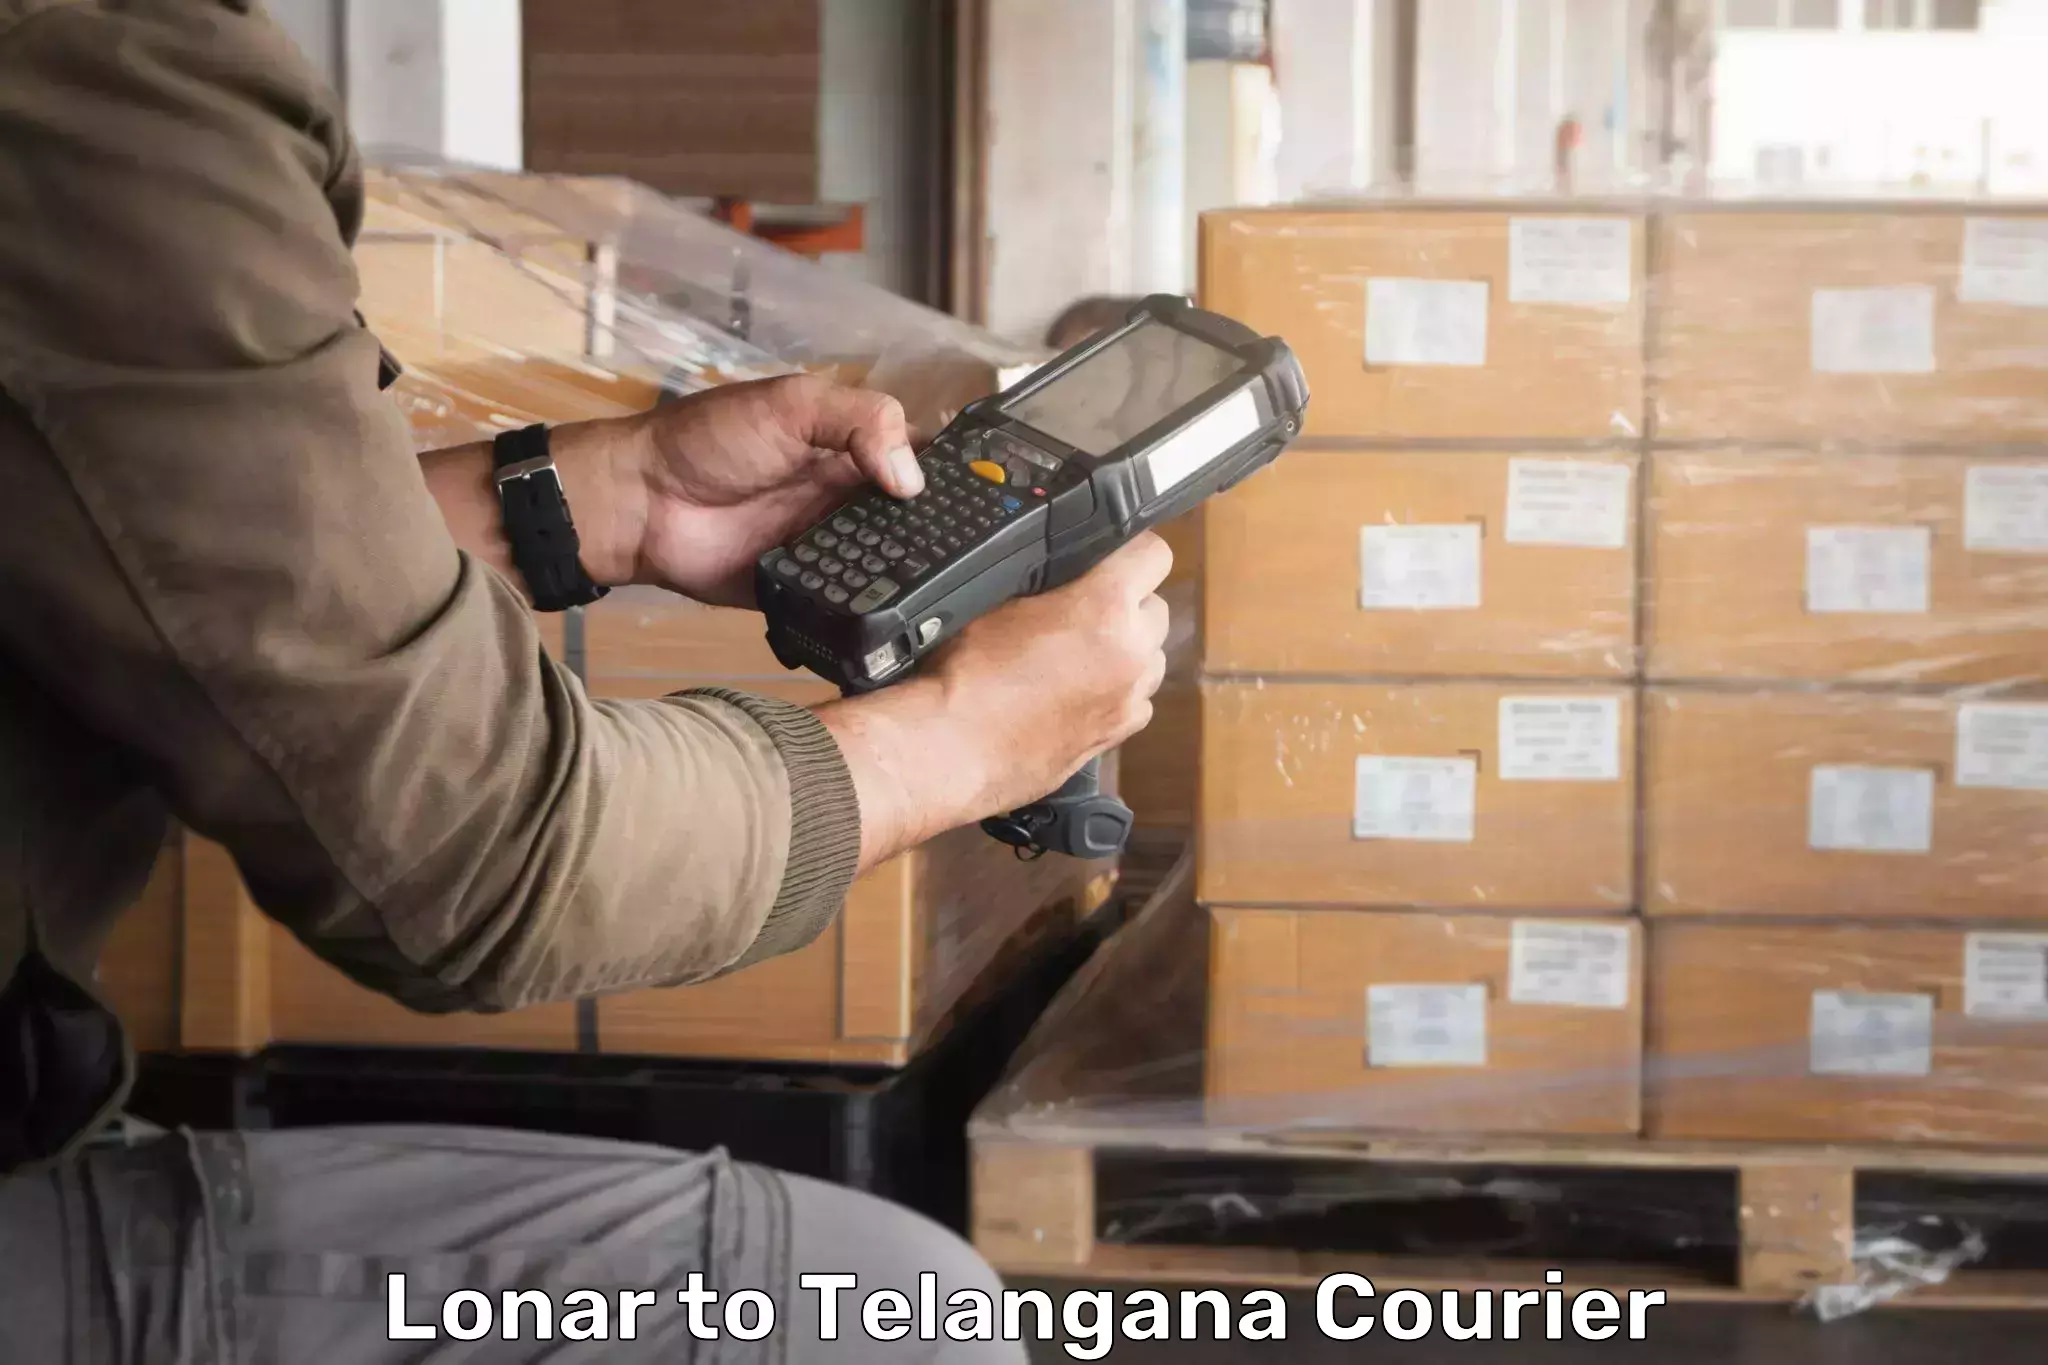 24/7 courier service Lonar to Amangal